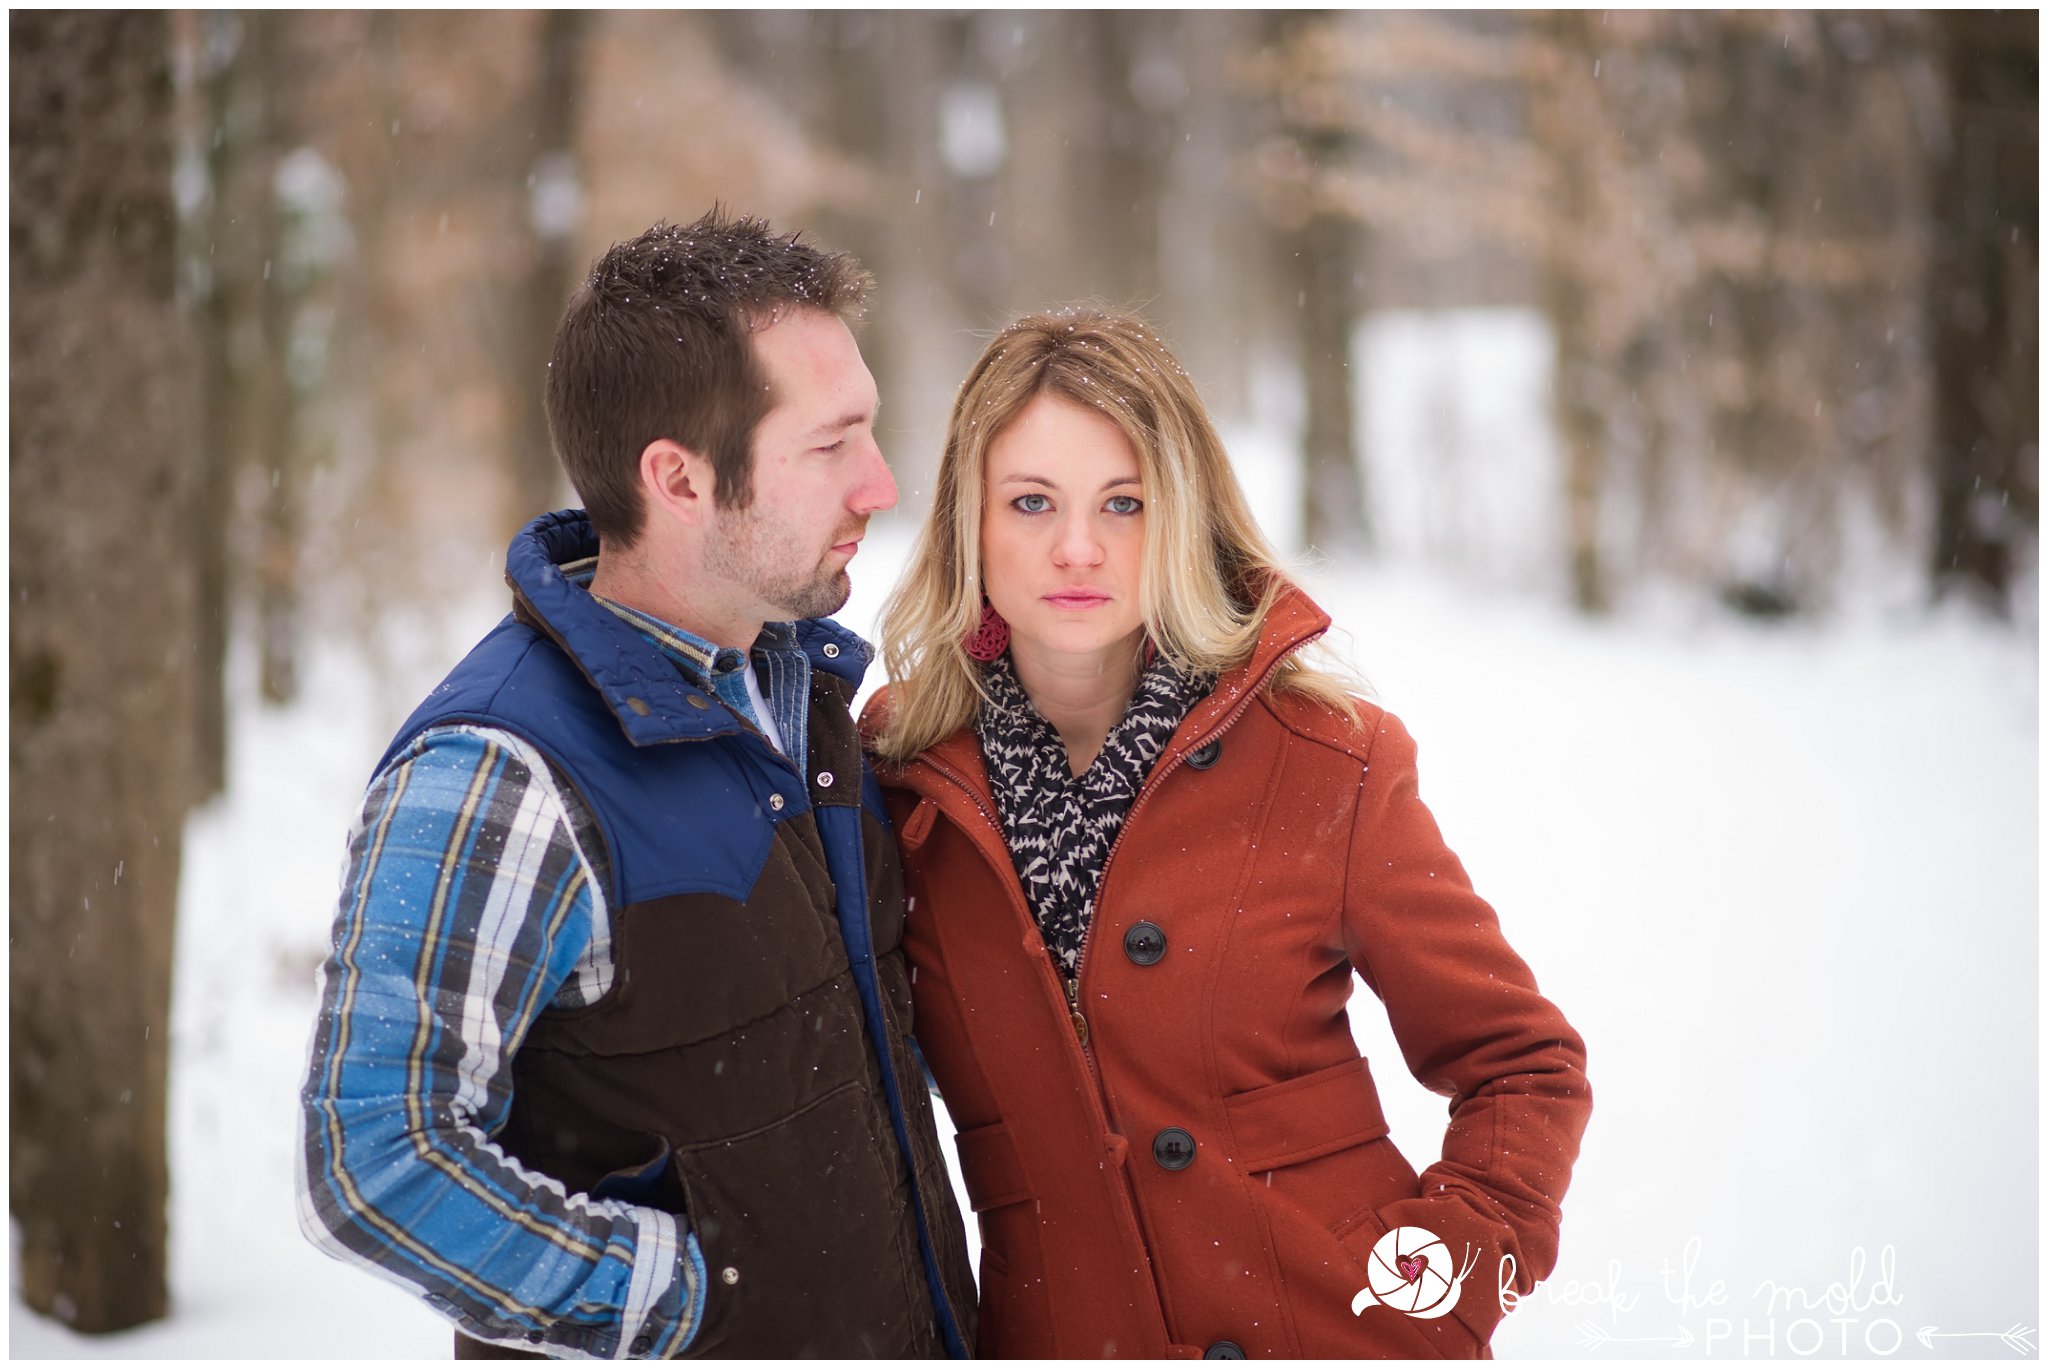 break-the-mold-photo-snowy-day-engagement-photos-knoxville-tn-tennessee-snow-day-pictures-winter-outdoor-unique-family_1501.jpg